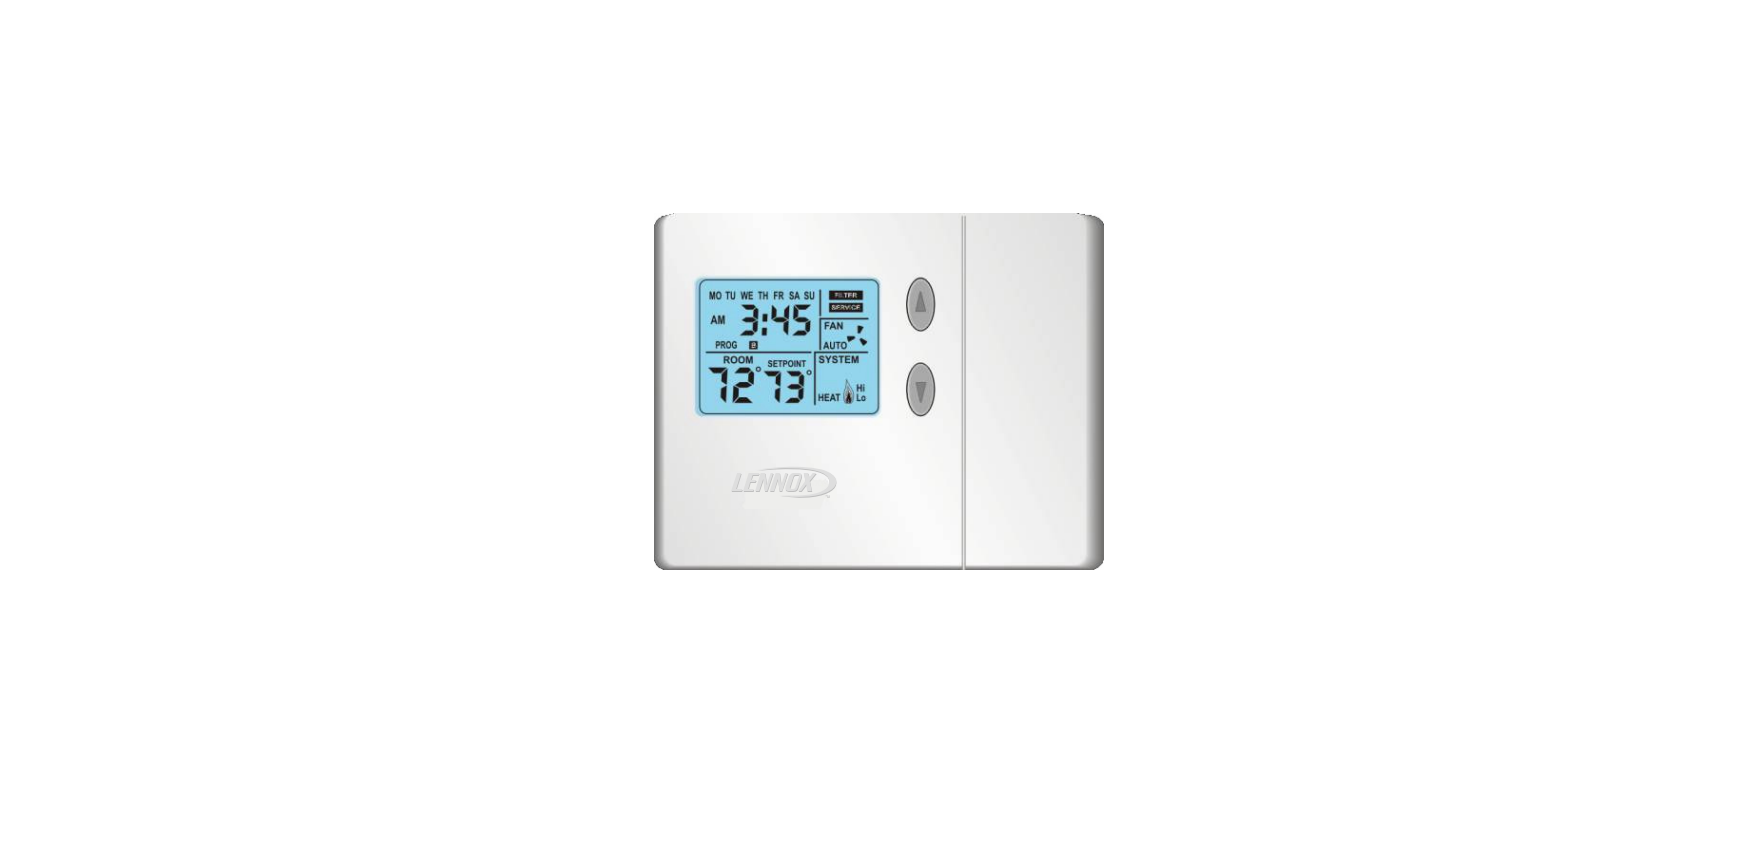 Lennox-L3511C-5-2-Days-Programmable-Thermostat-featured